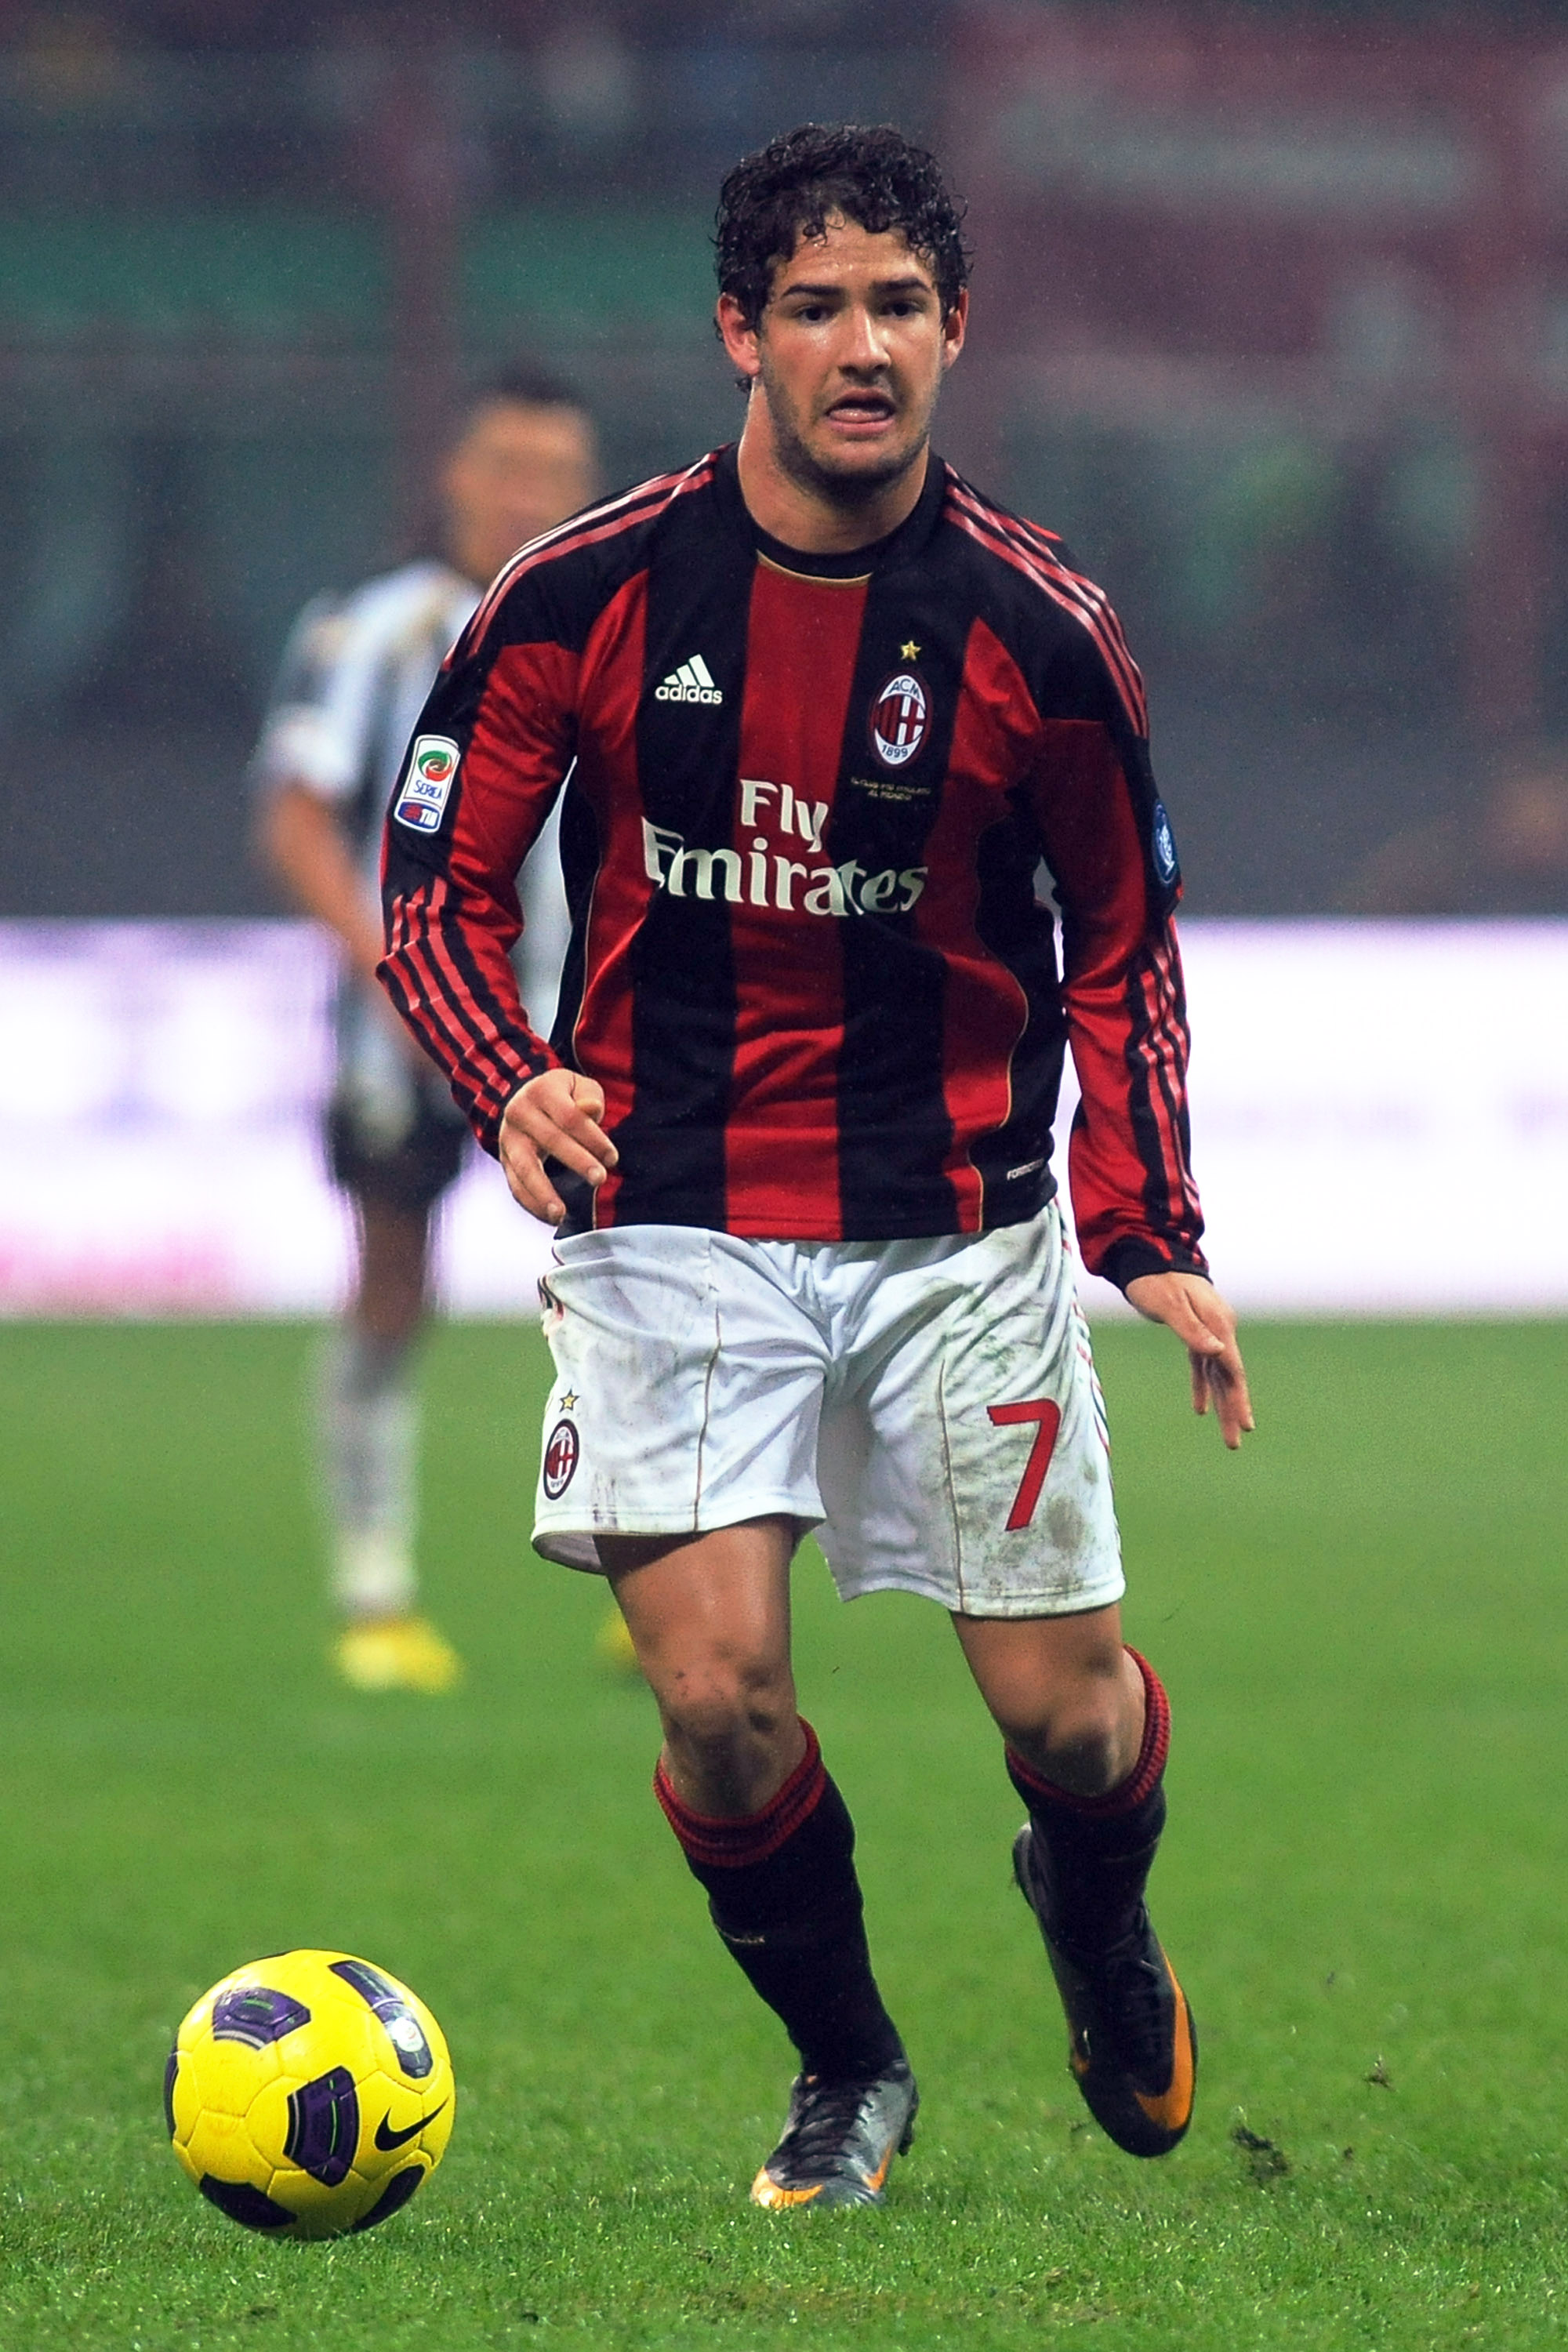 MILAN, ITALY - JANUARY 09:  Pato of AC Milan in action during the Serie A match between AC Milan and Udinese Calcio at Stadio Giuseppe Meazza on January 9, 2011 in Milan, Italy.  (Photo by Valerio Pennicino/Getty Images)